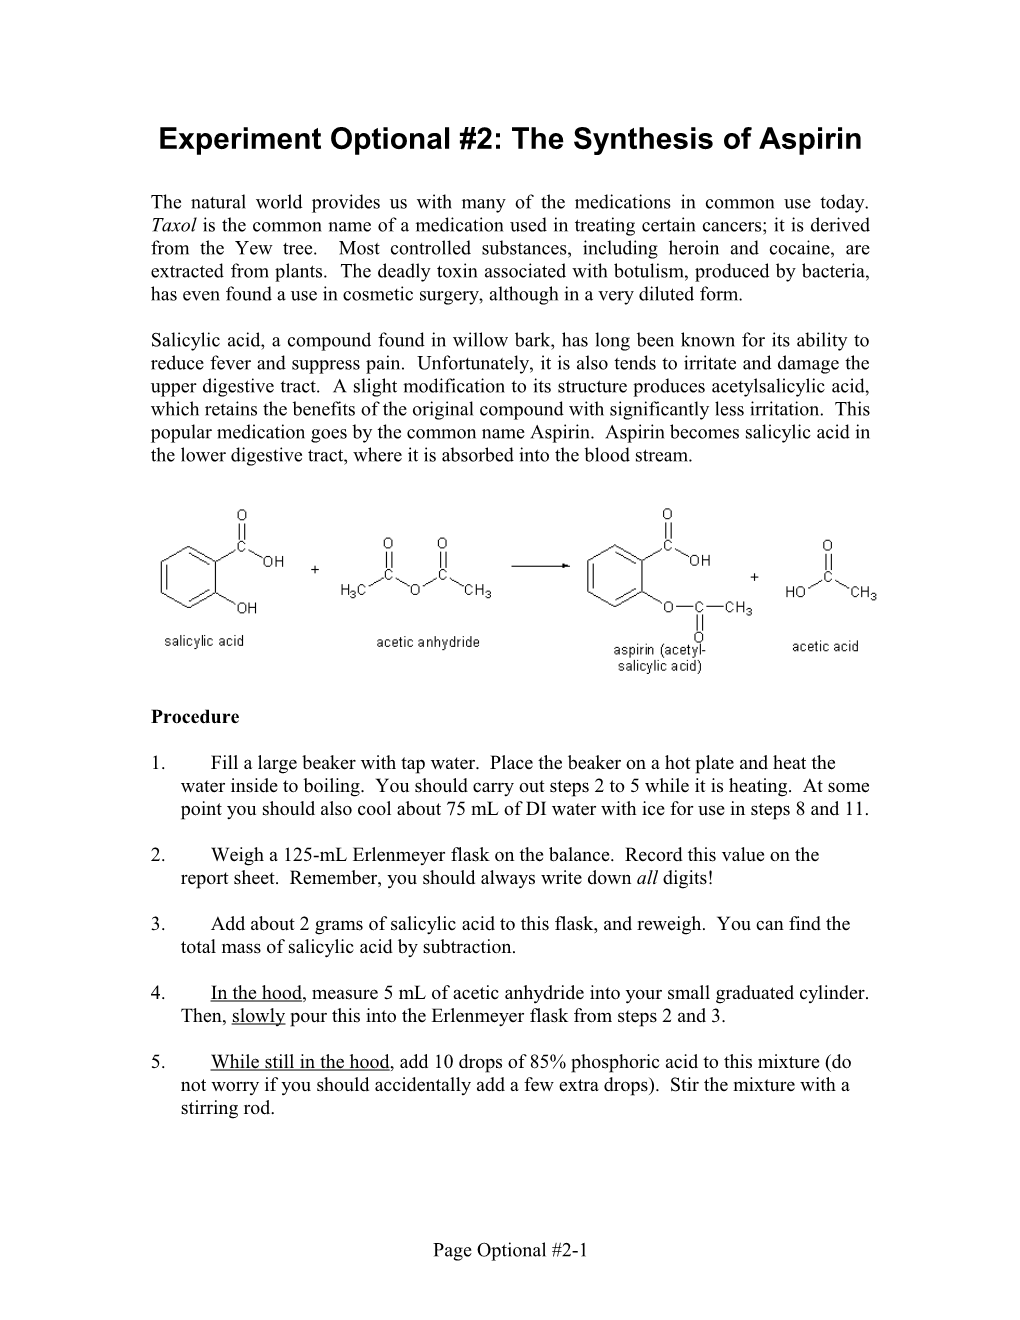 The Synthesis of Aspirin